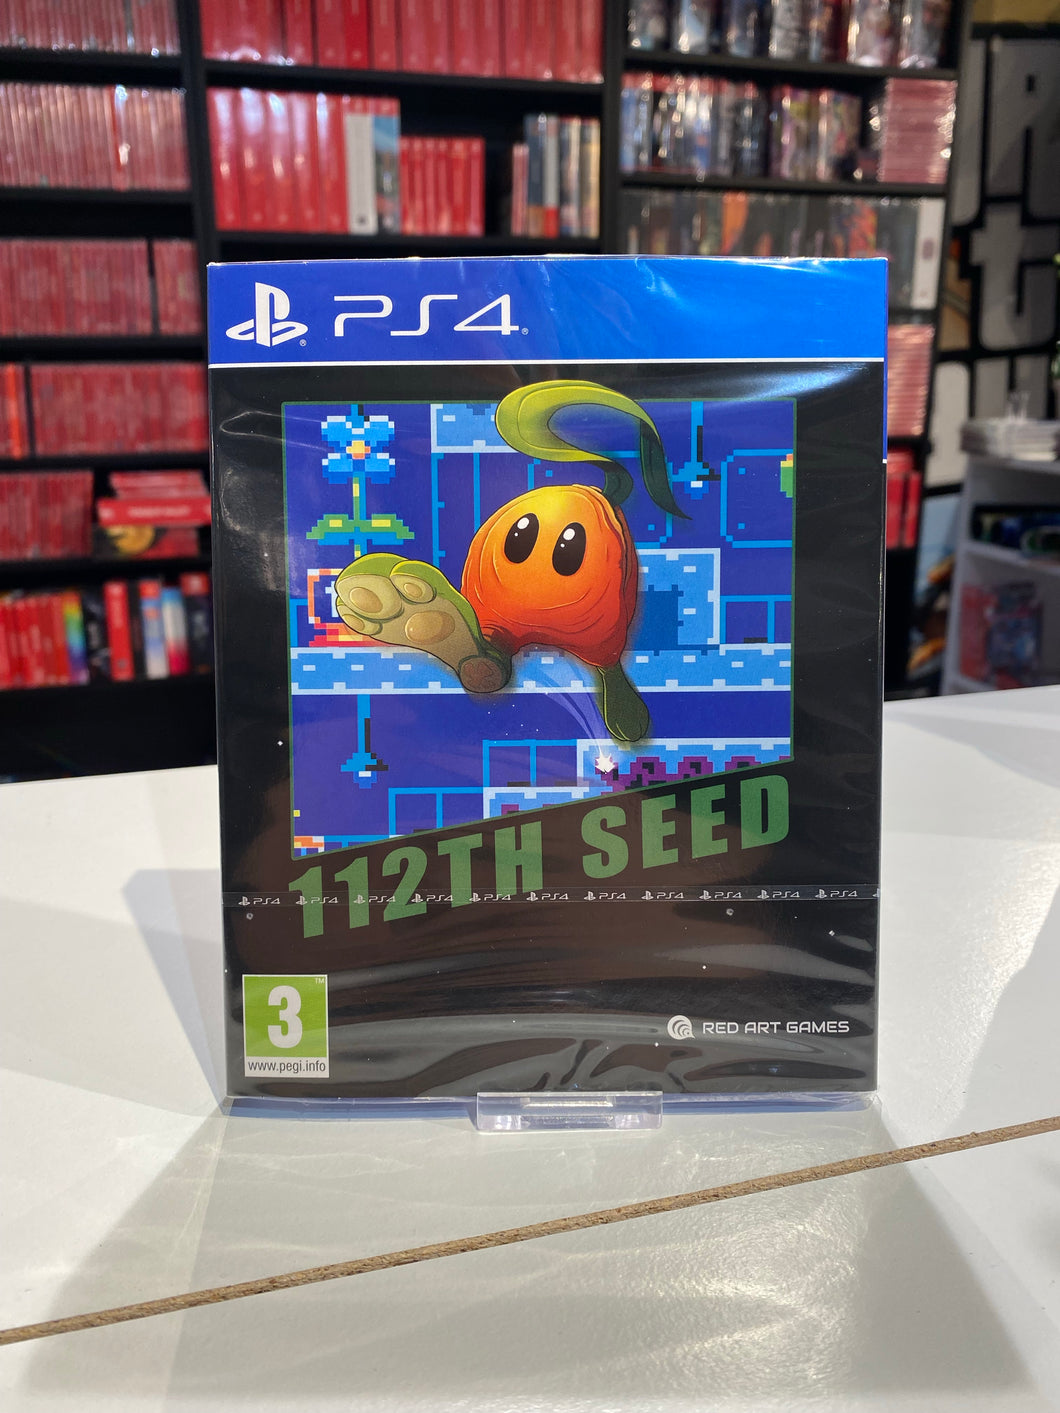 112th seed / Red art games / PS4 / 999 copies